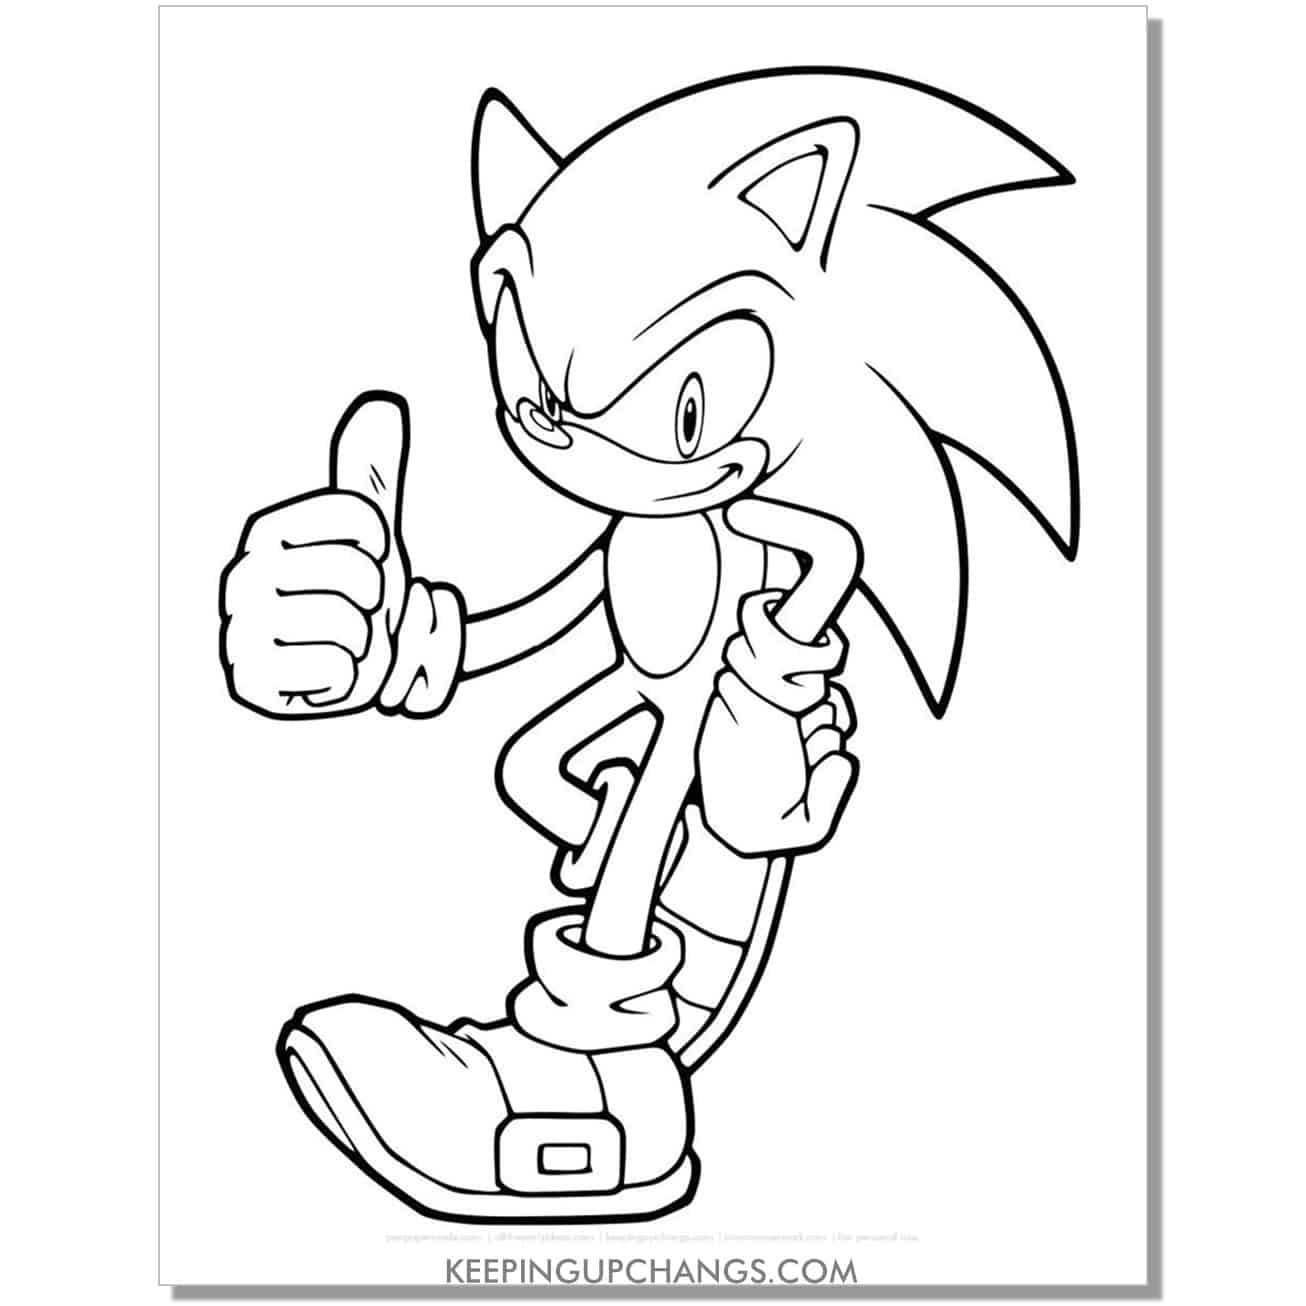 sonic with one hand on hip and other thumbs up coloring page.